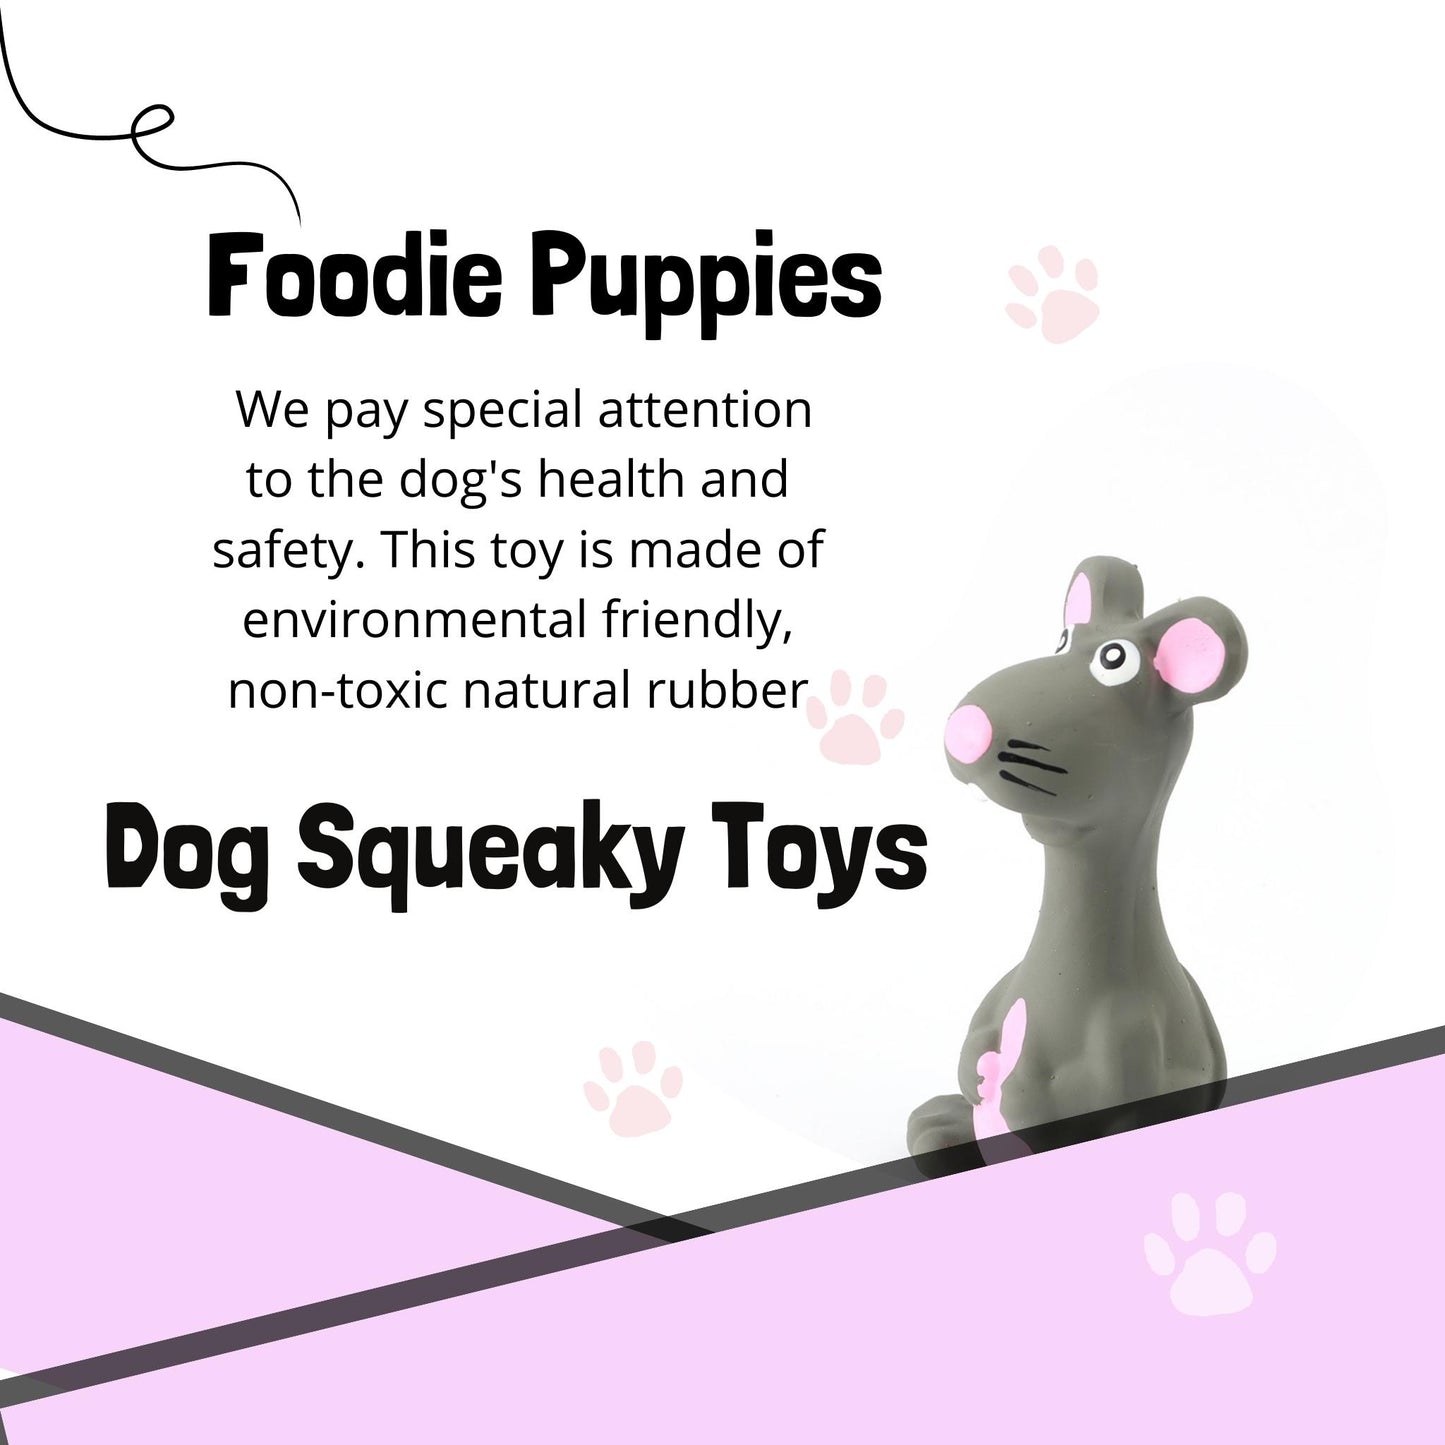 Foodie Puppies Latex Rubber Squeaky Dog Chew Toy - Grey Mouse